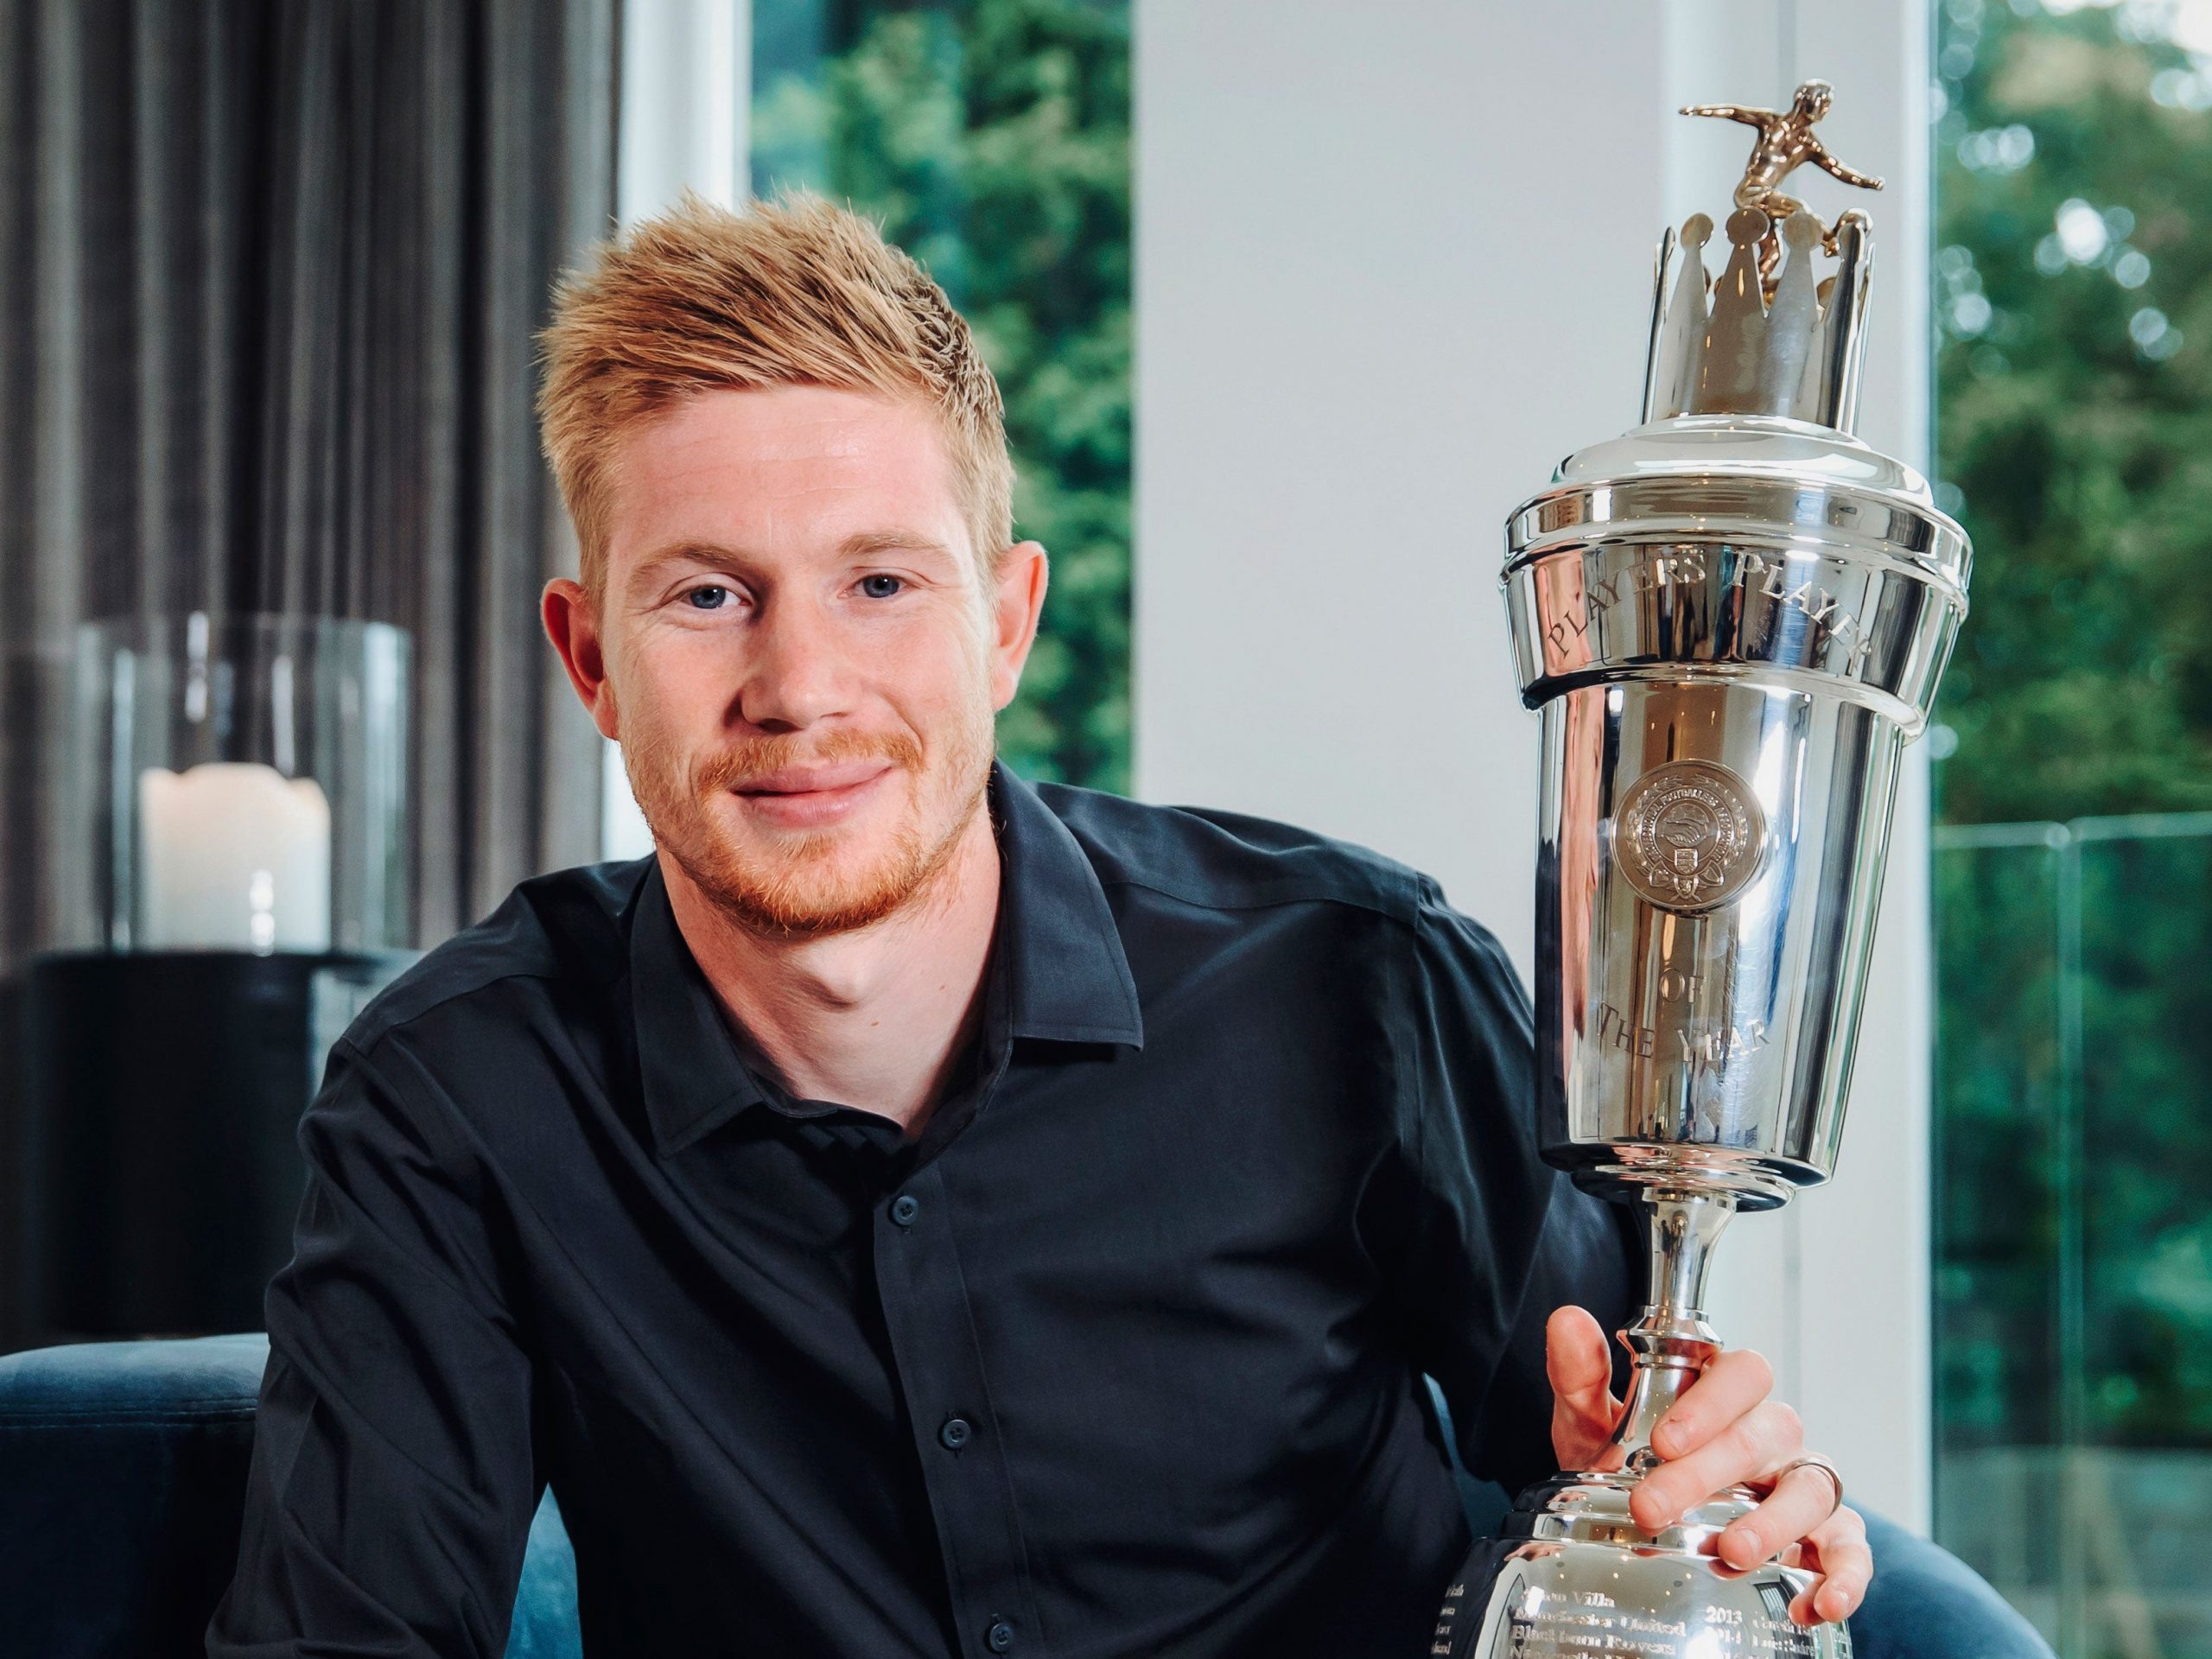 Premier League Player of the Year- Kevin De Bruyne